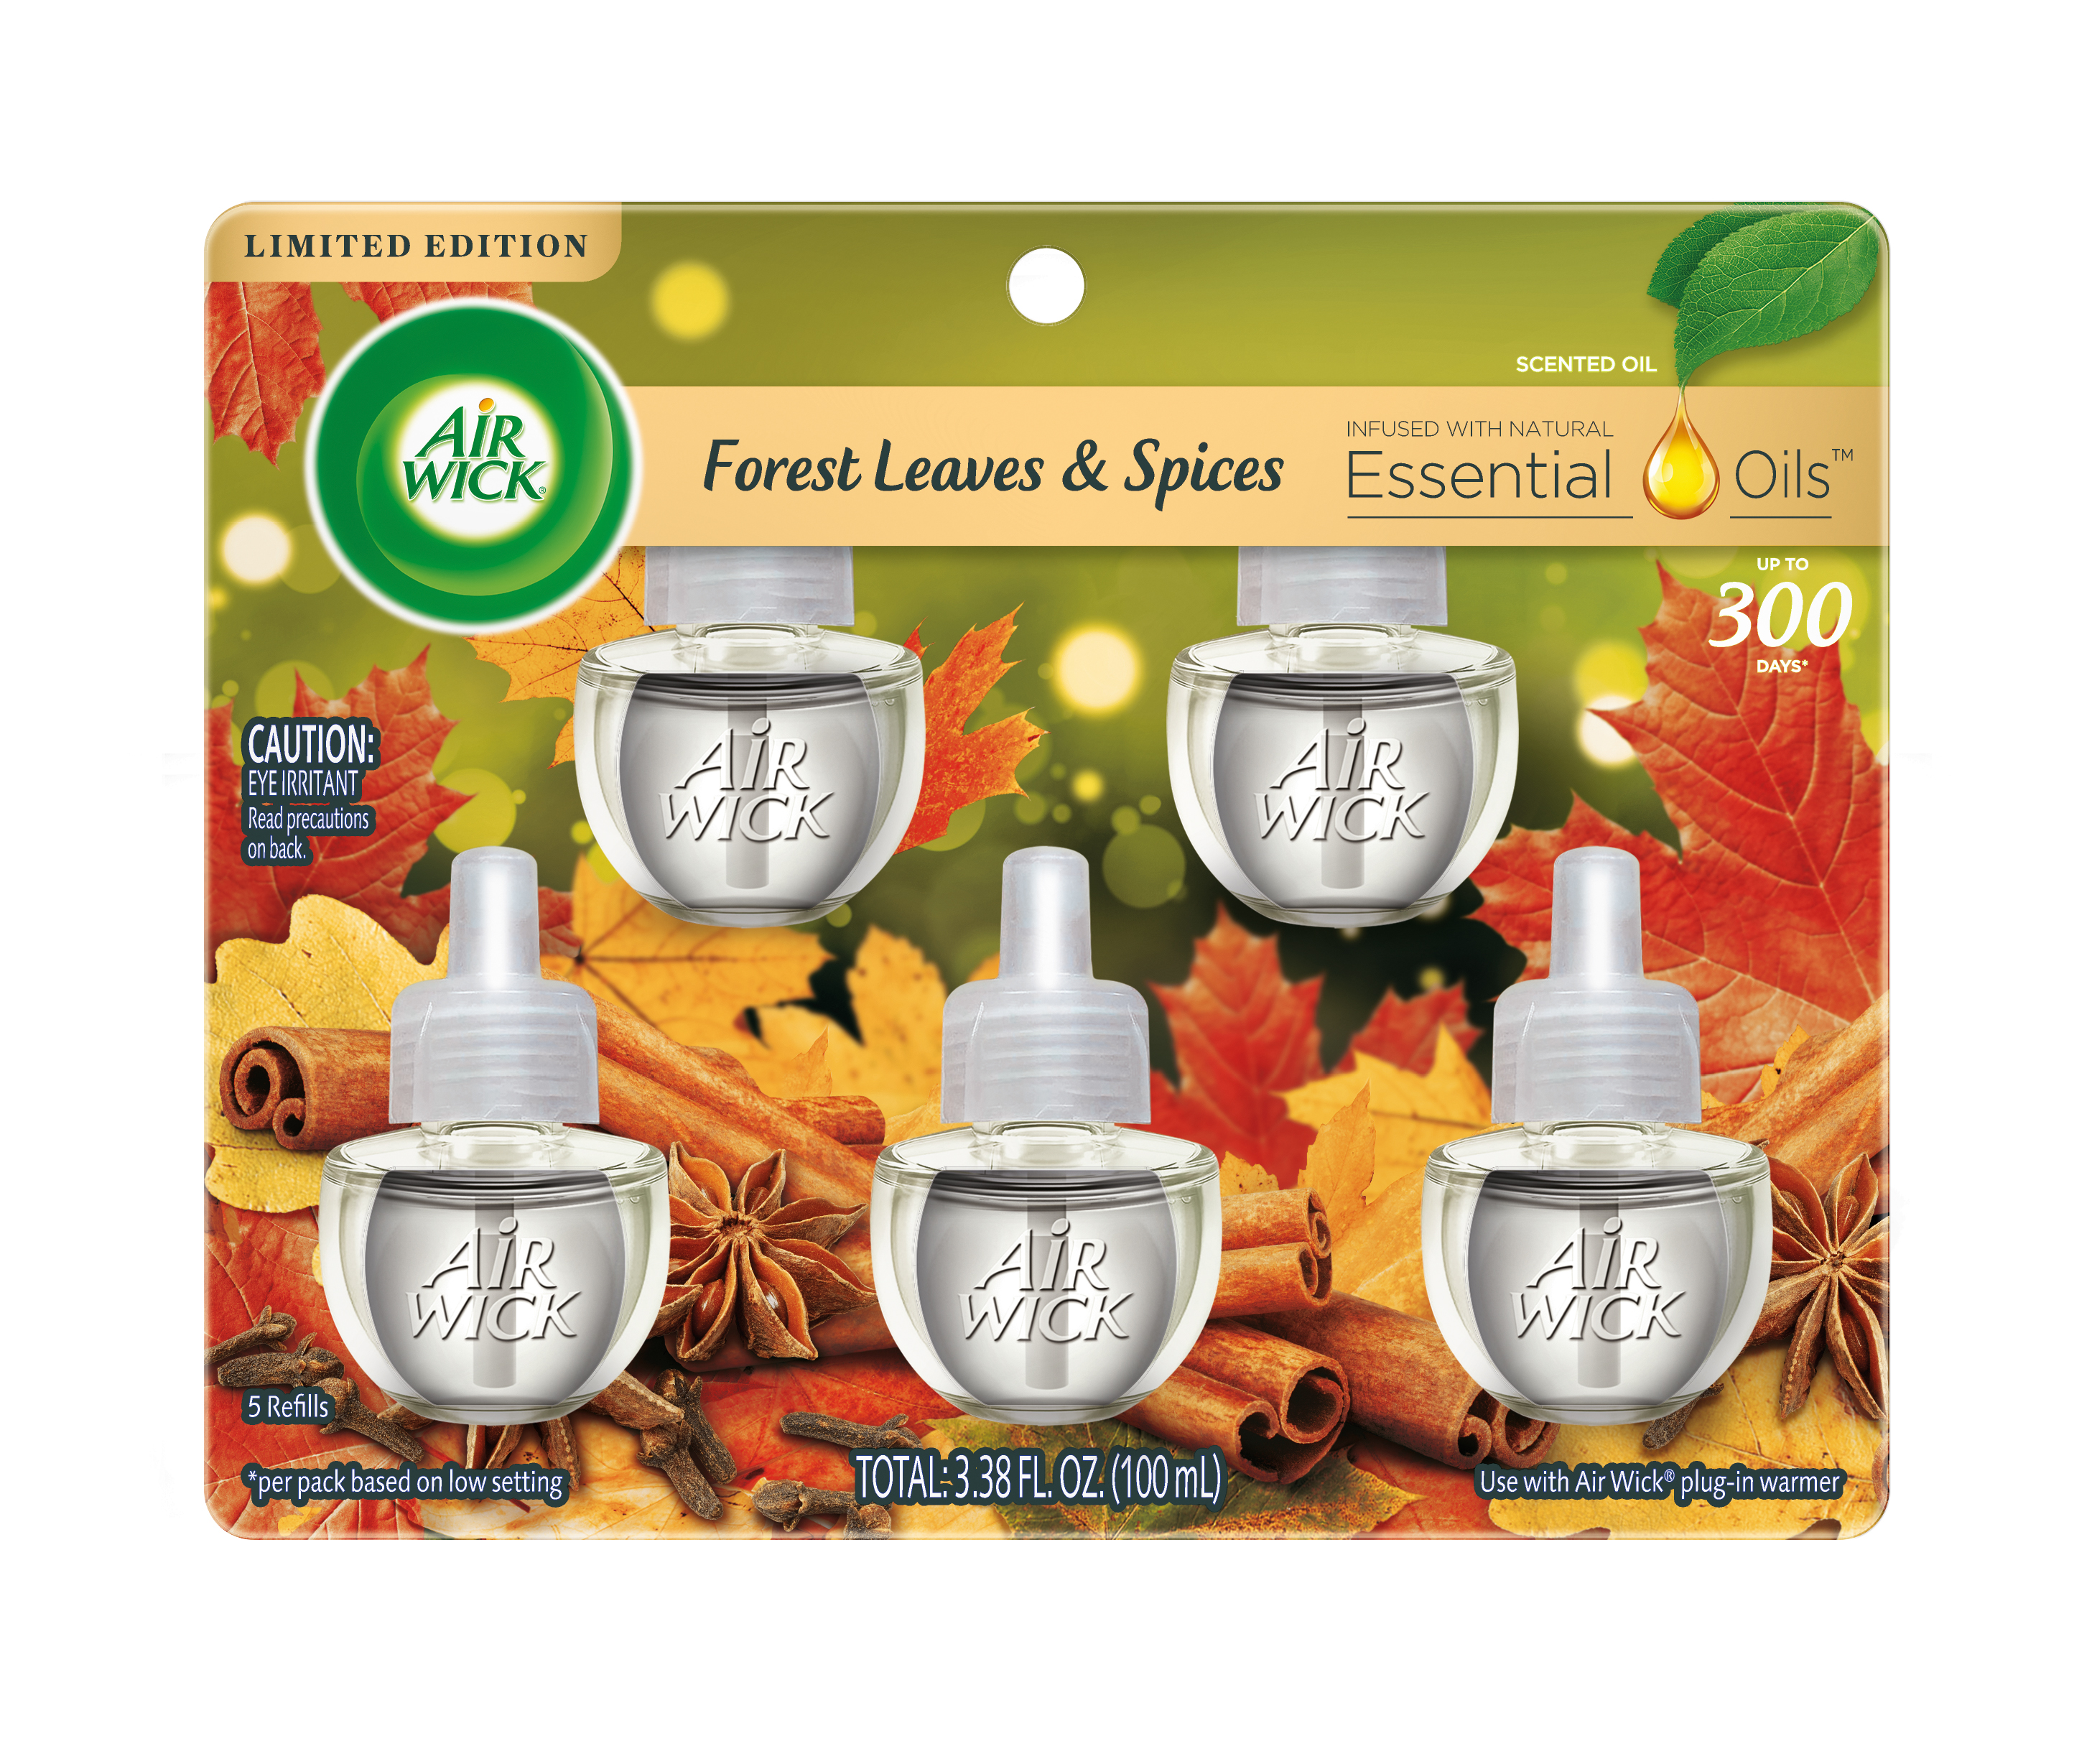 AIR WICK Scented Oil  Forest Leaves  Spices